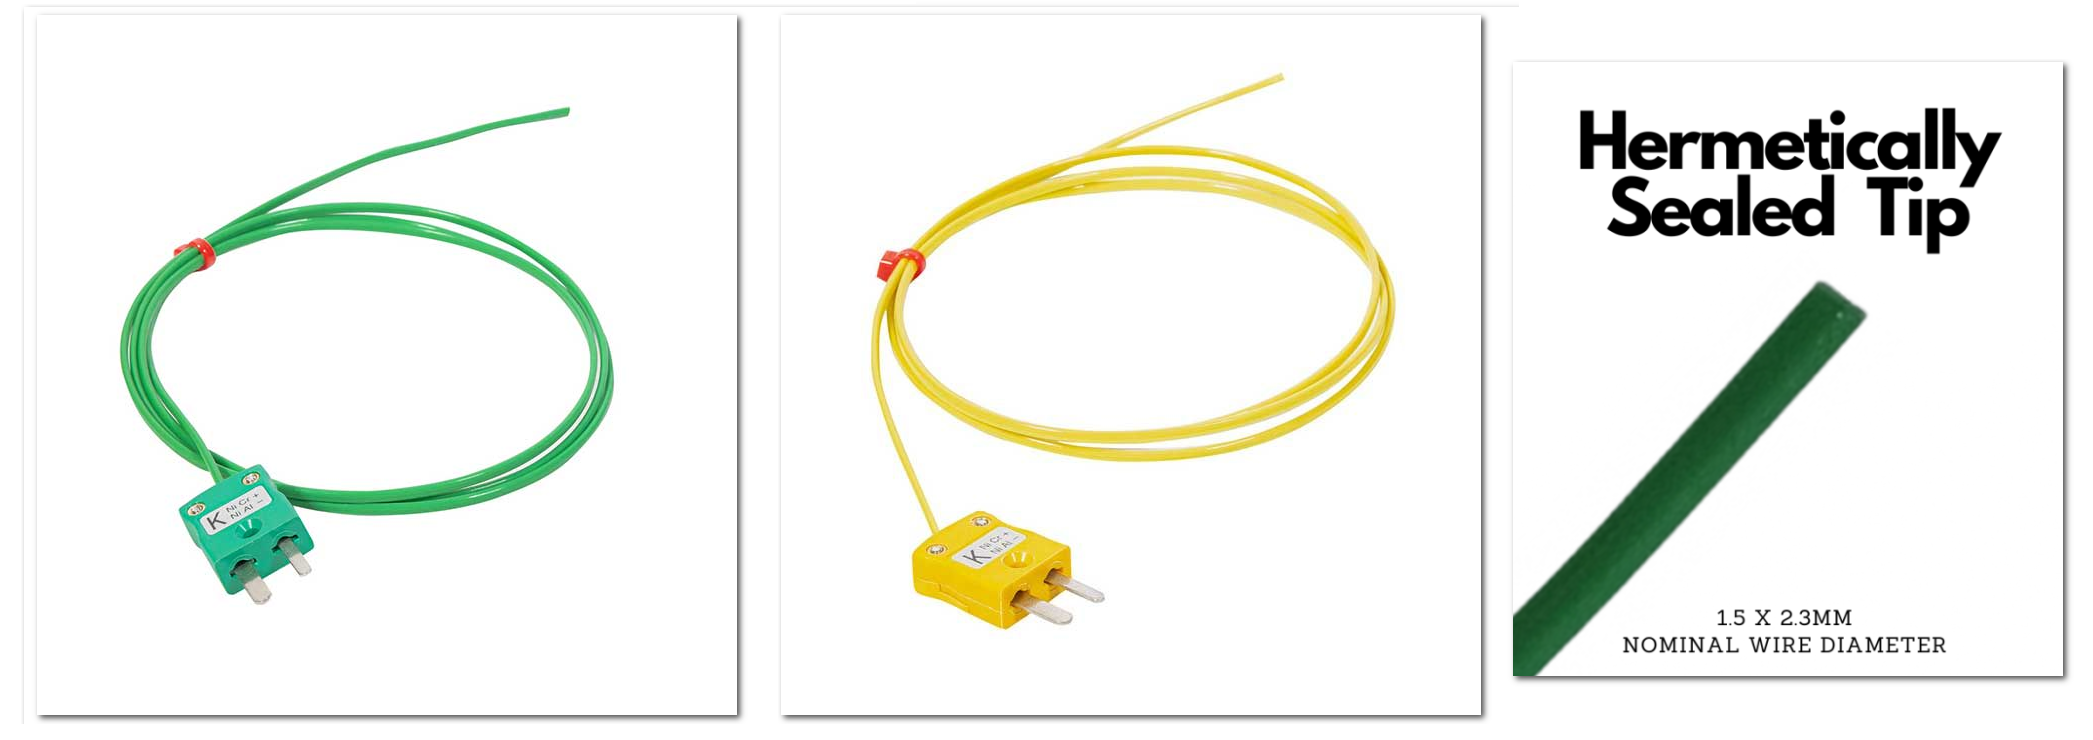 New Product – Hermetically Sealed Thermocouples